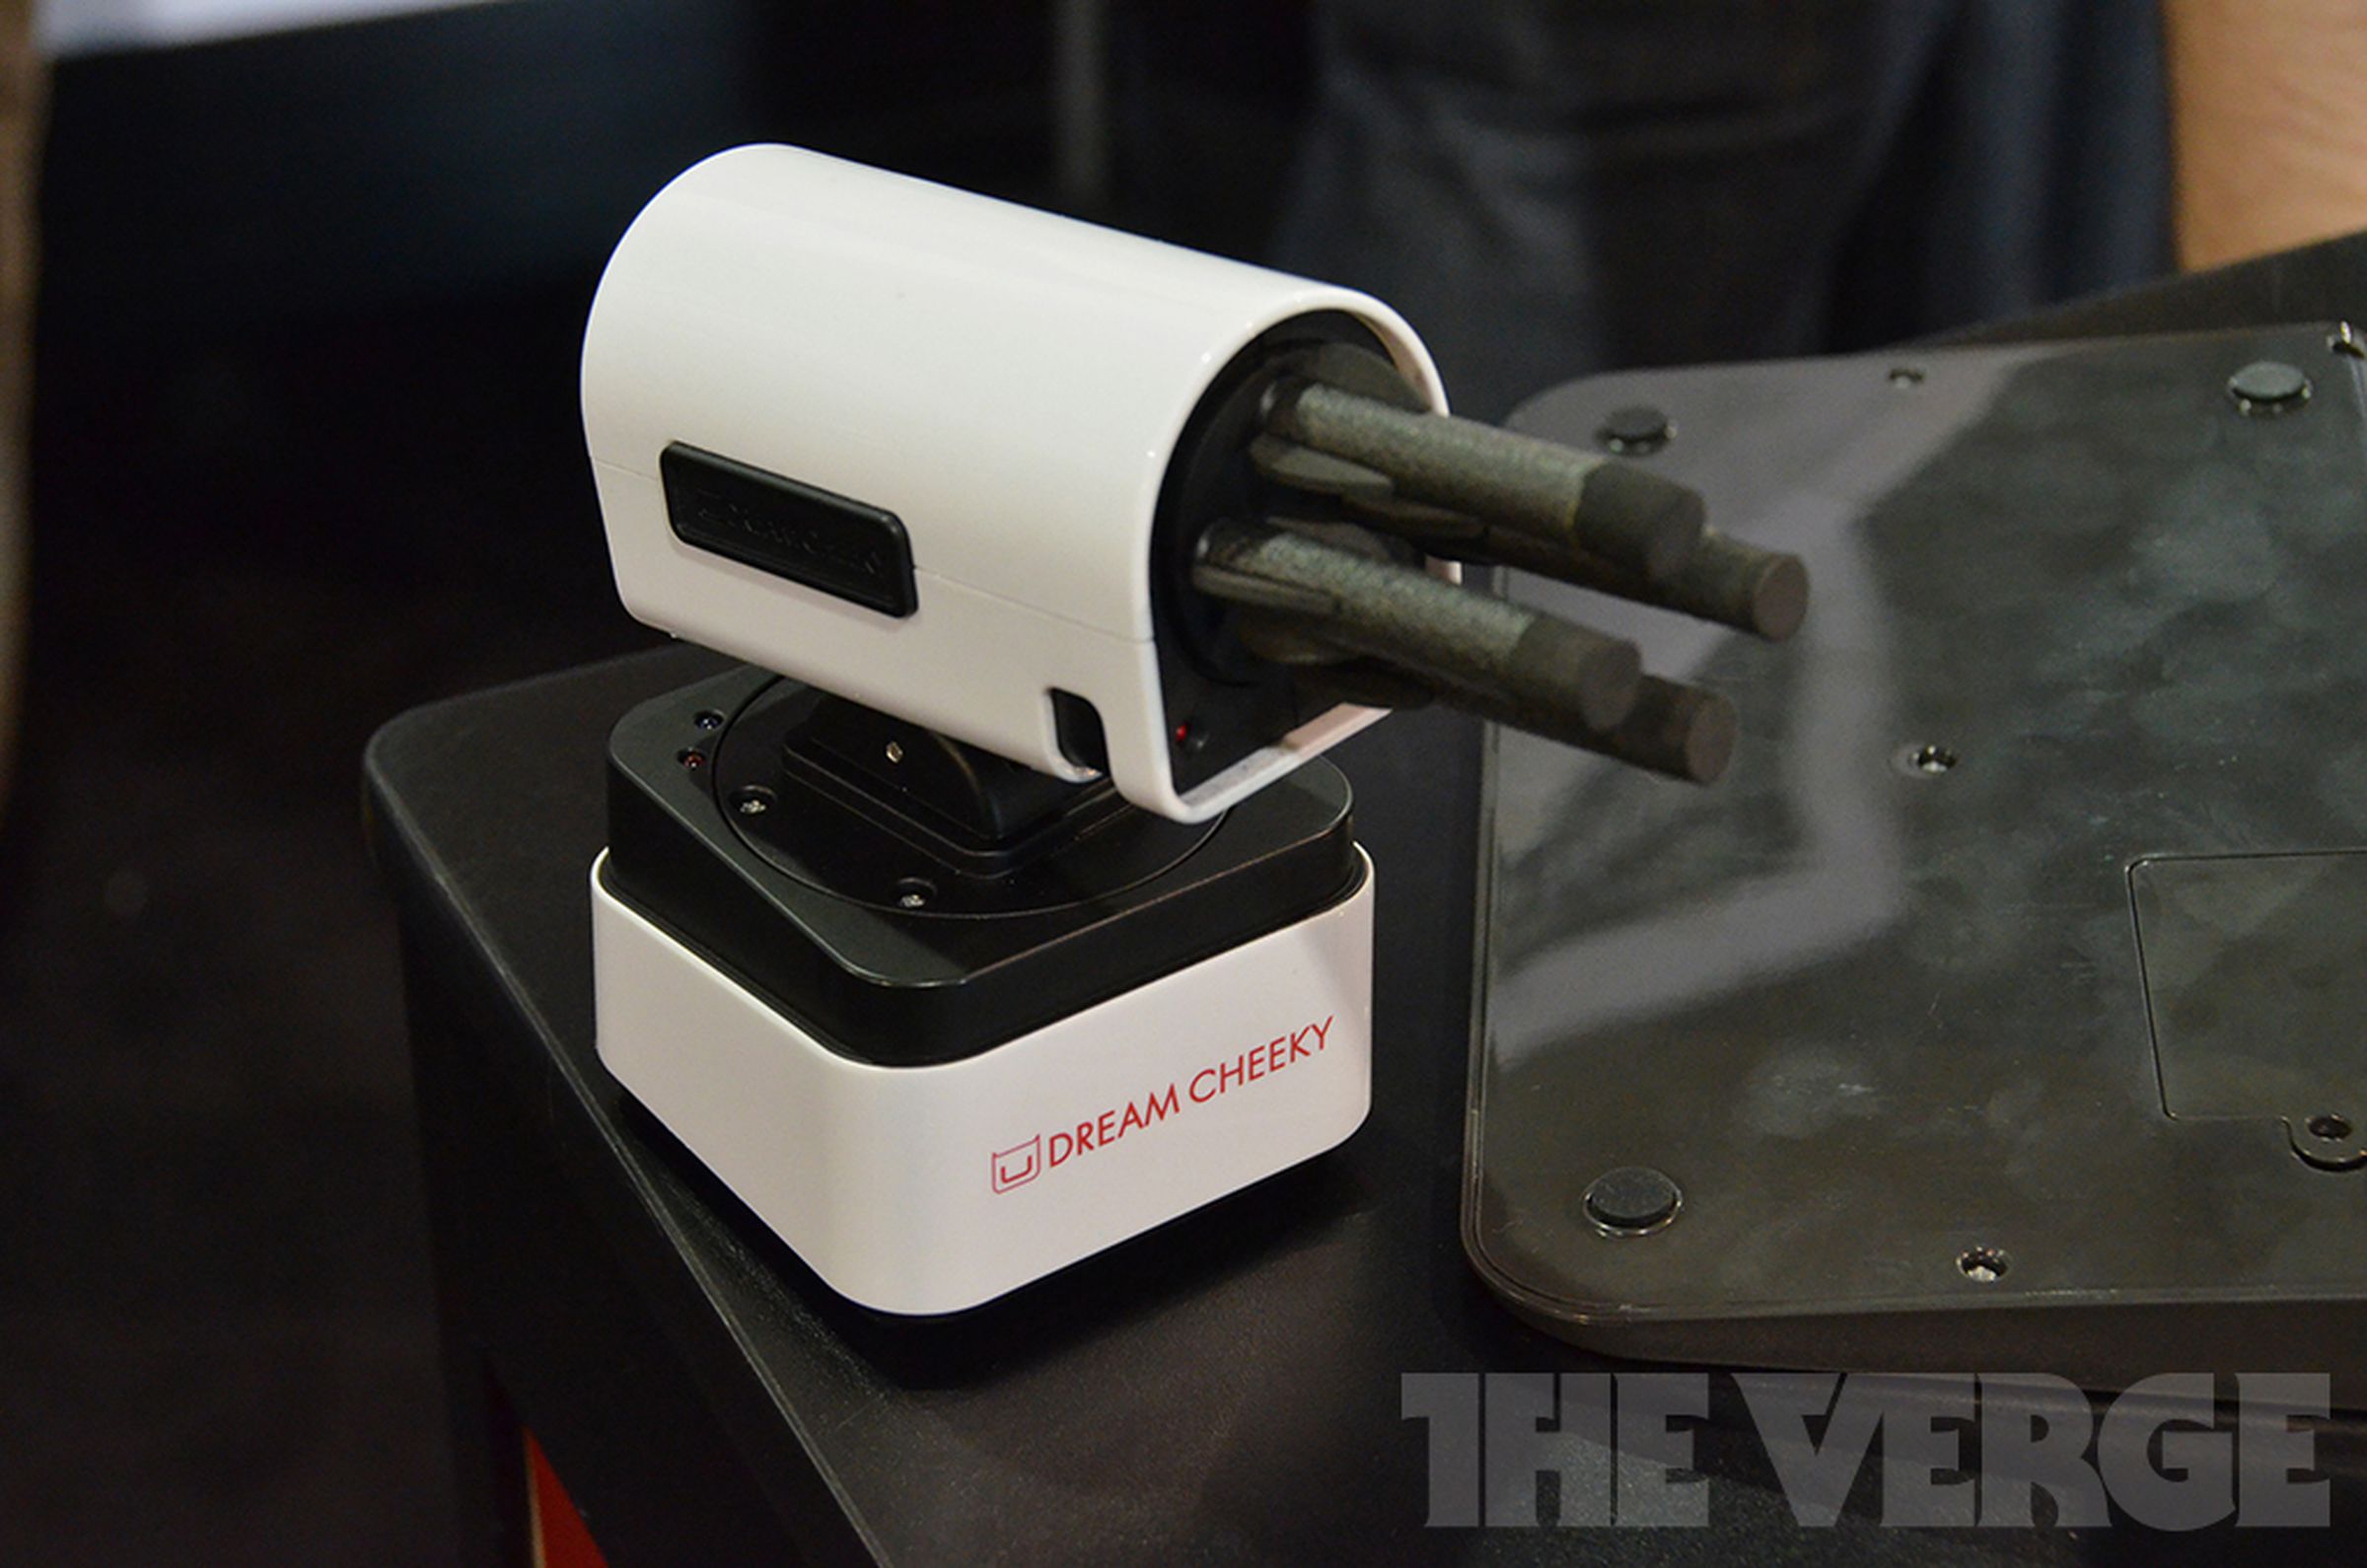 iLaunch Thunder missile launcher for iPhone (hands-on photos)